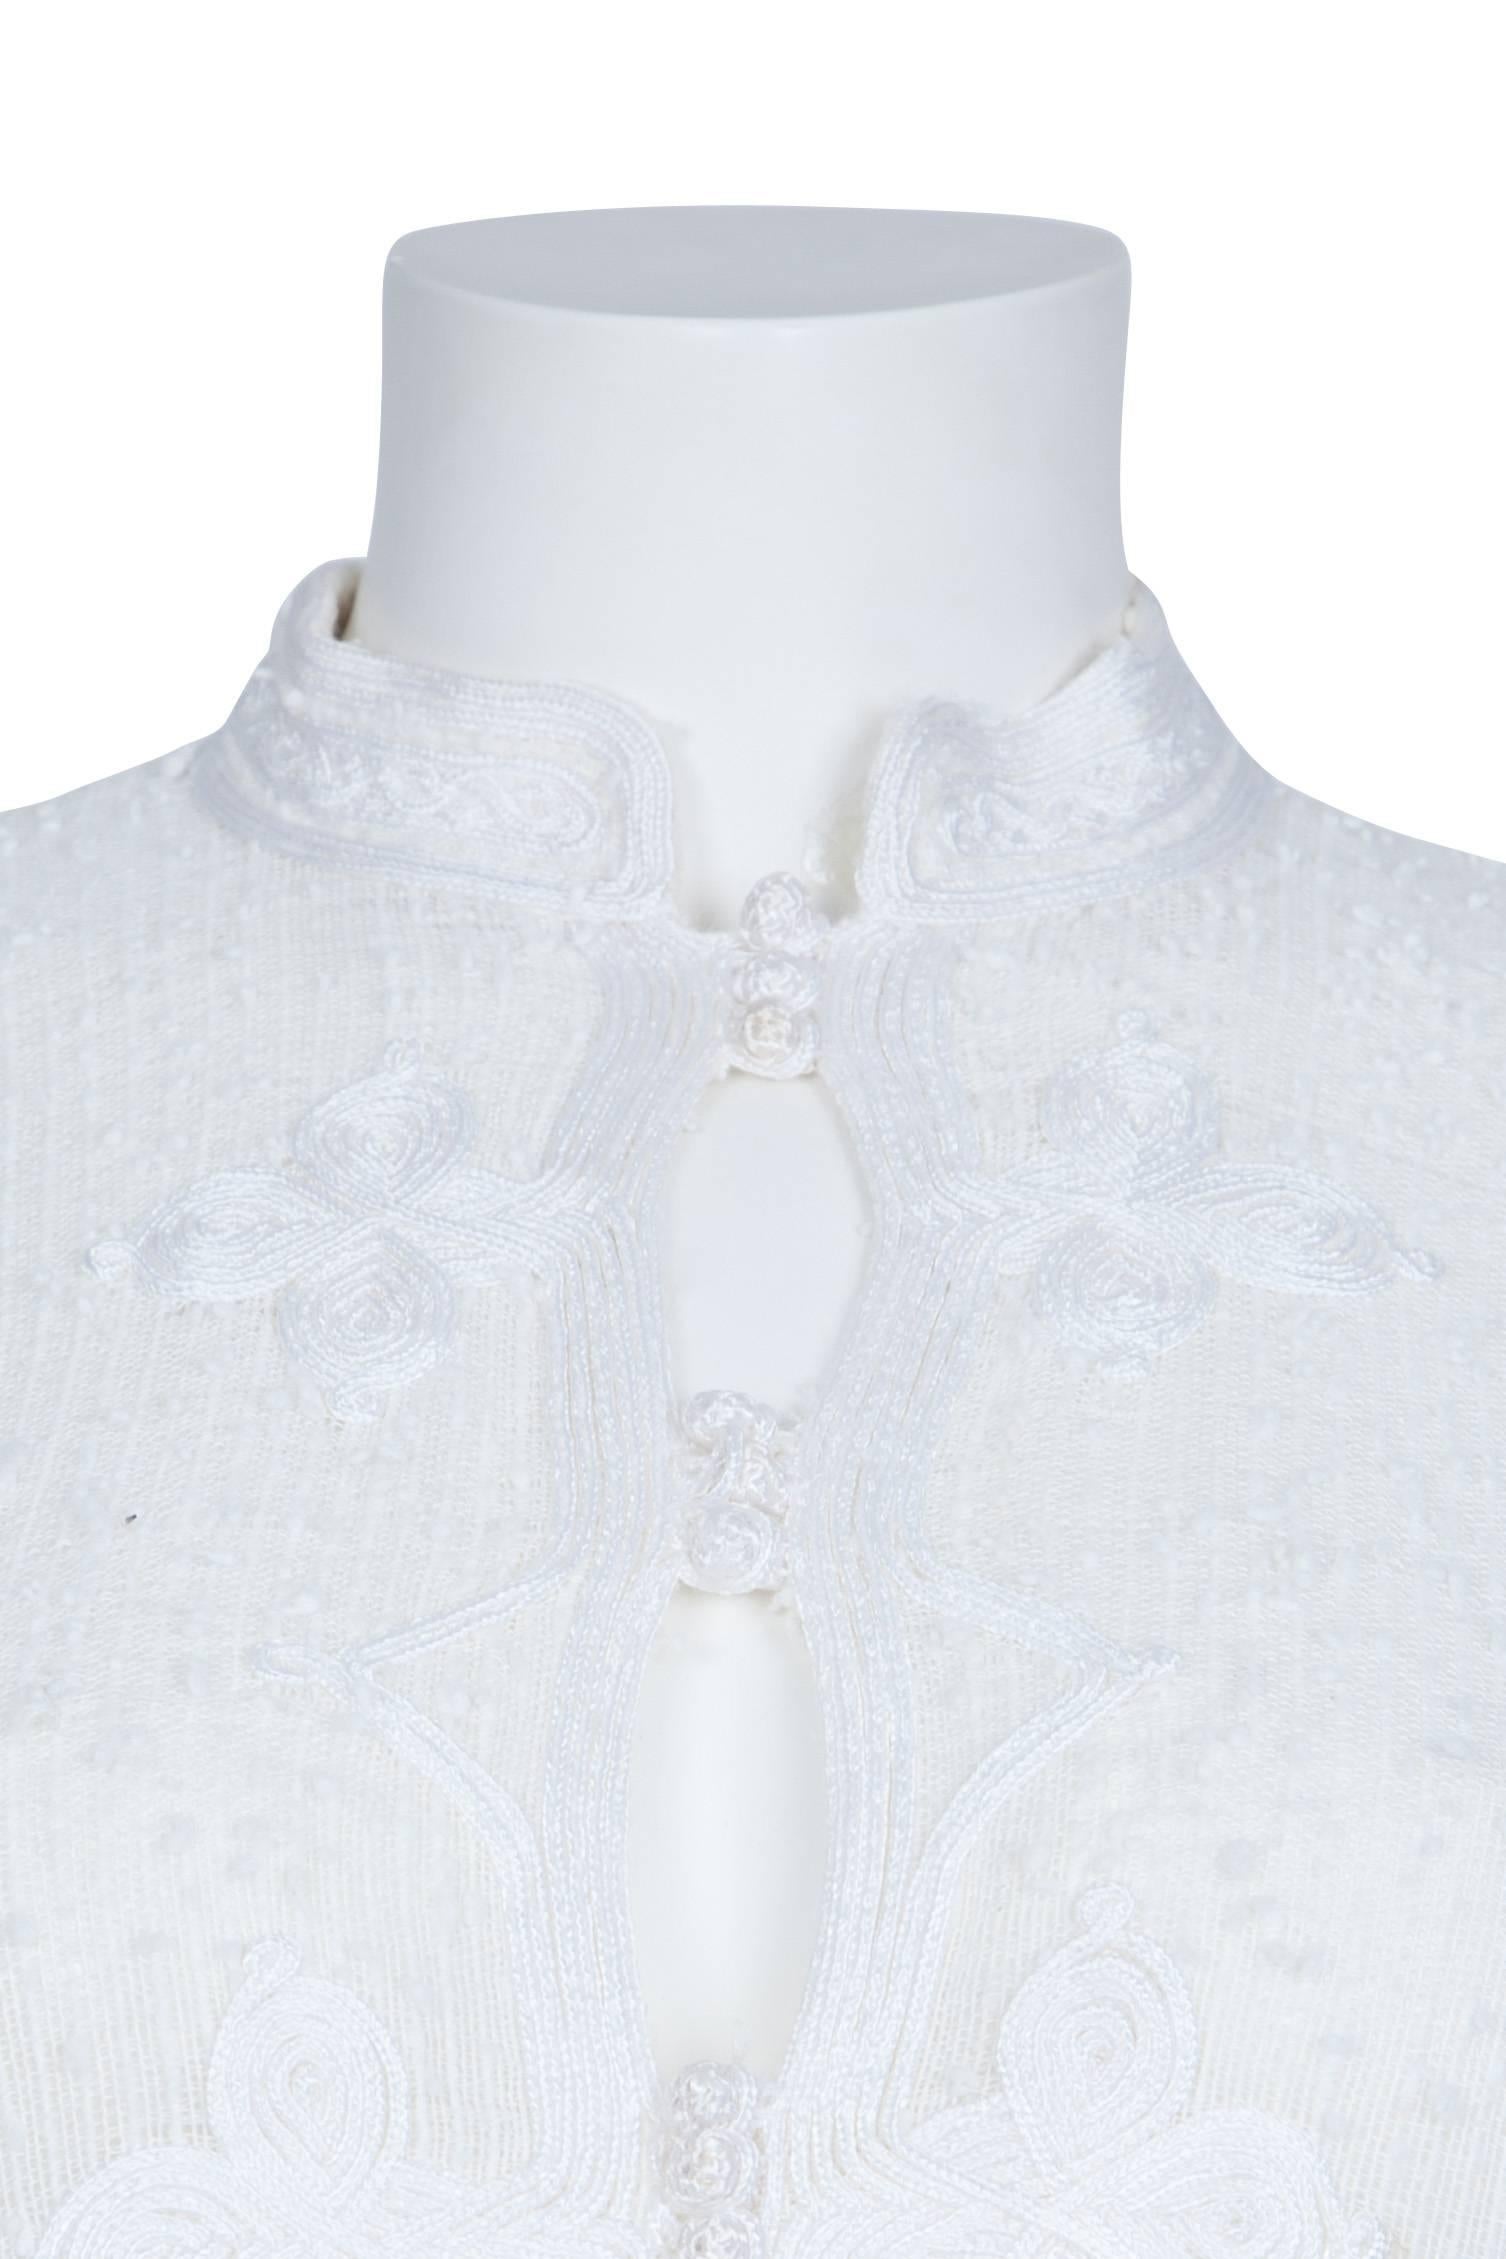 Harald Raw Cotton Braid Embroidery Tunic For Sale 4